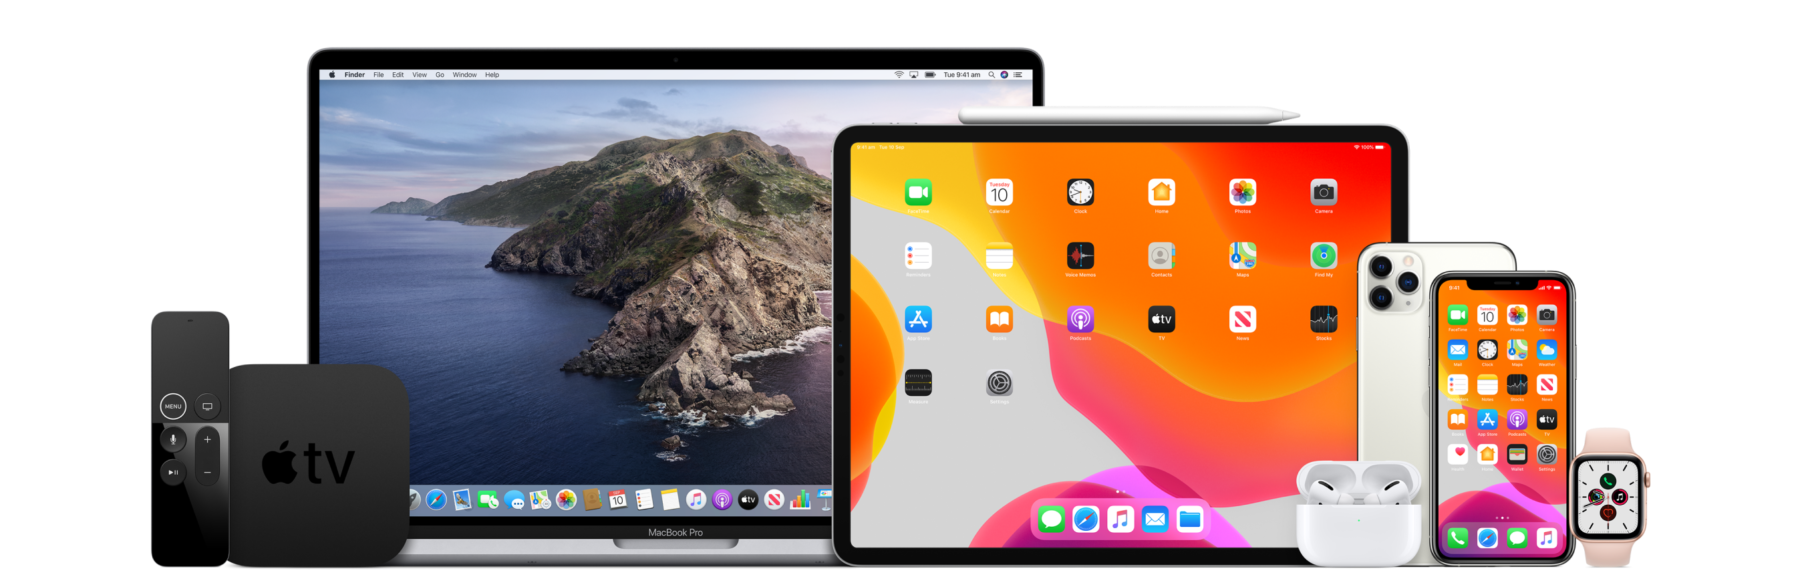 Various Apple devices including a MacBook Pro, iPad, iPhone, Apple Watch, Apple TV, and remote, showcasing their screens and designs.